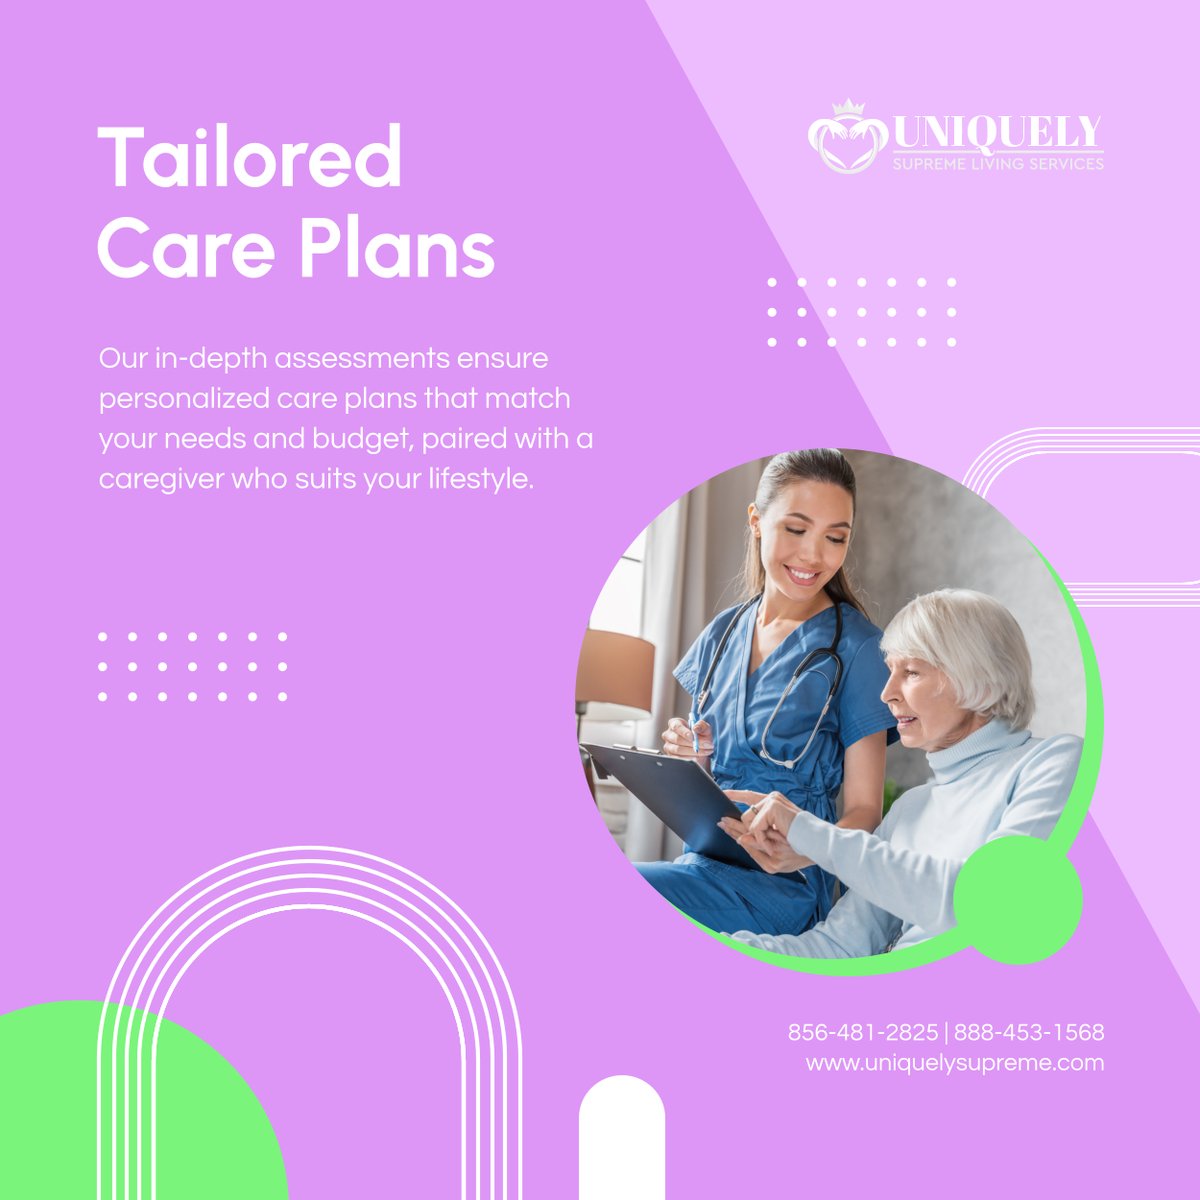 Experience customized care plans and compassionate support tailored to your unique needs. Contact us today! 

#JenkintownPA #HomeCare #PersonalizedCare